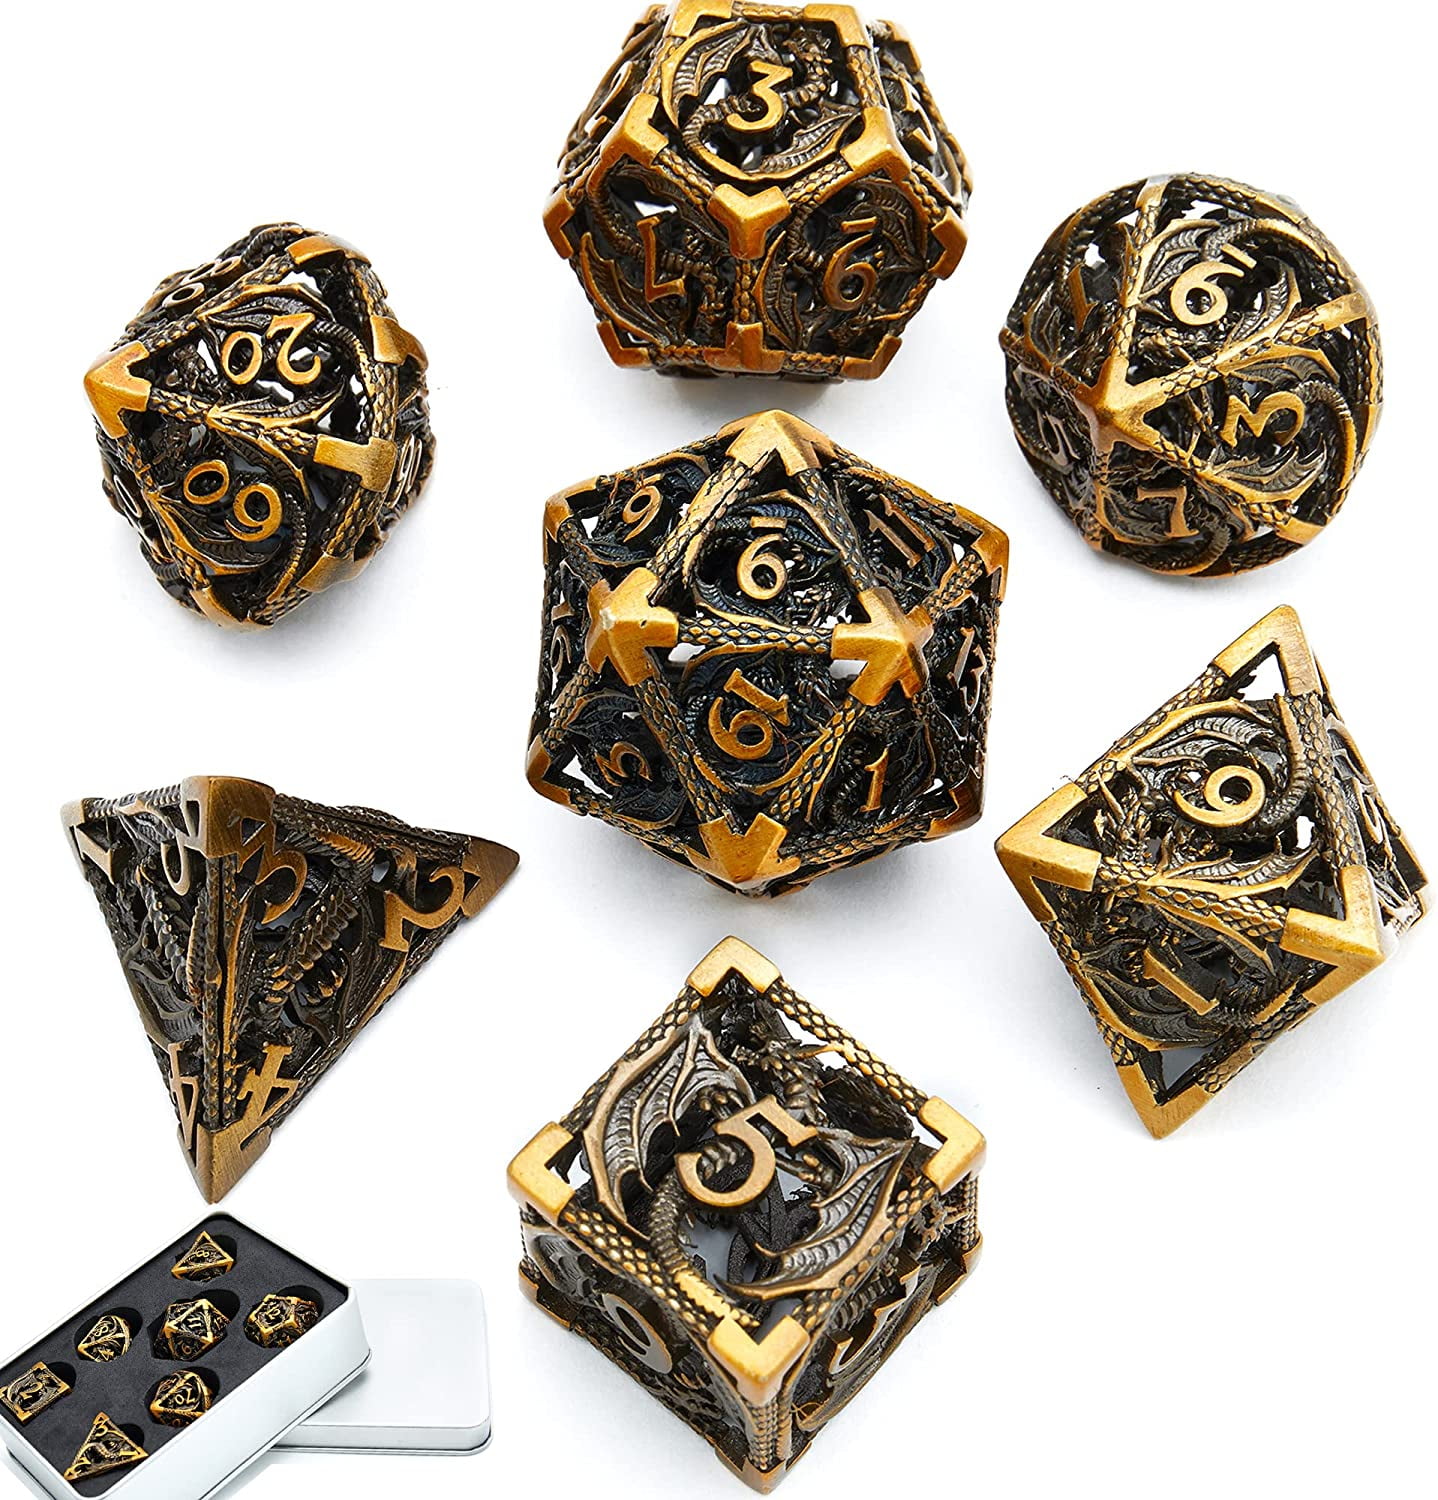 PJOY Resin DND Dice Set Polyhedral D&D Dragon Dice for Dungeons and Dragons Pathfinder Shadowrun Role Playing Games-Olive Silver Numbers 